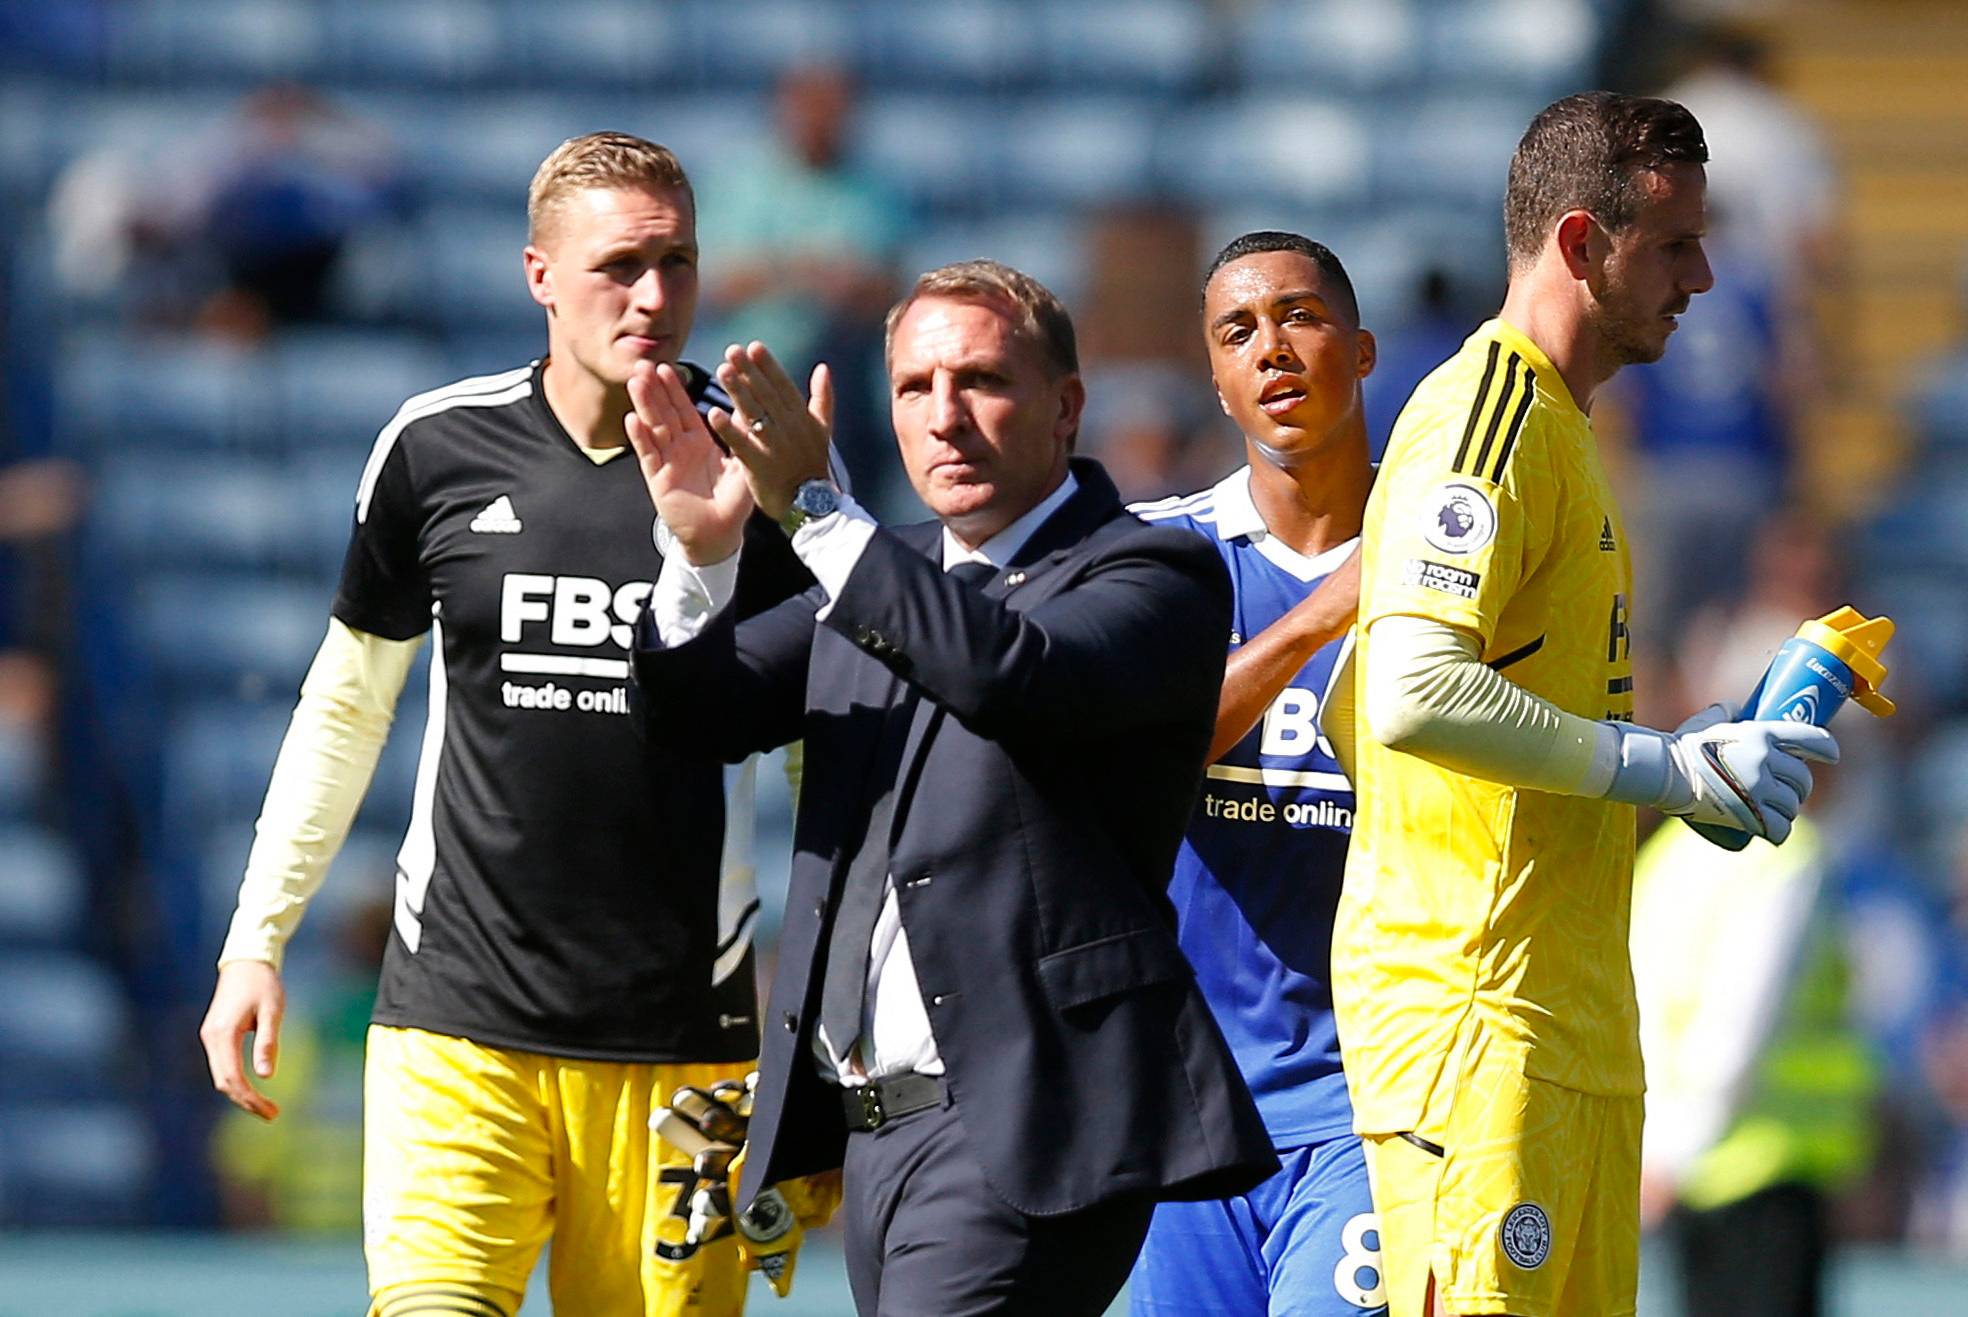 Leicester City manager Brendan Rodgers with Daniel Iversen, Youri Tielemans and Danny Ward after the match